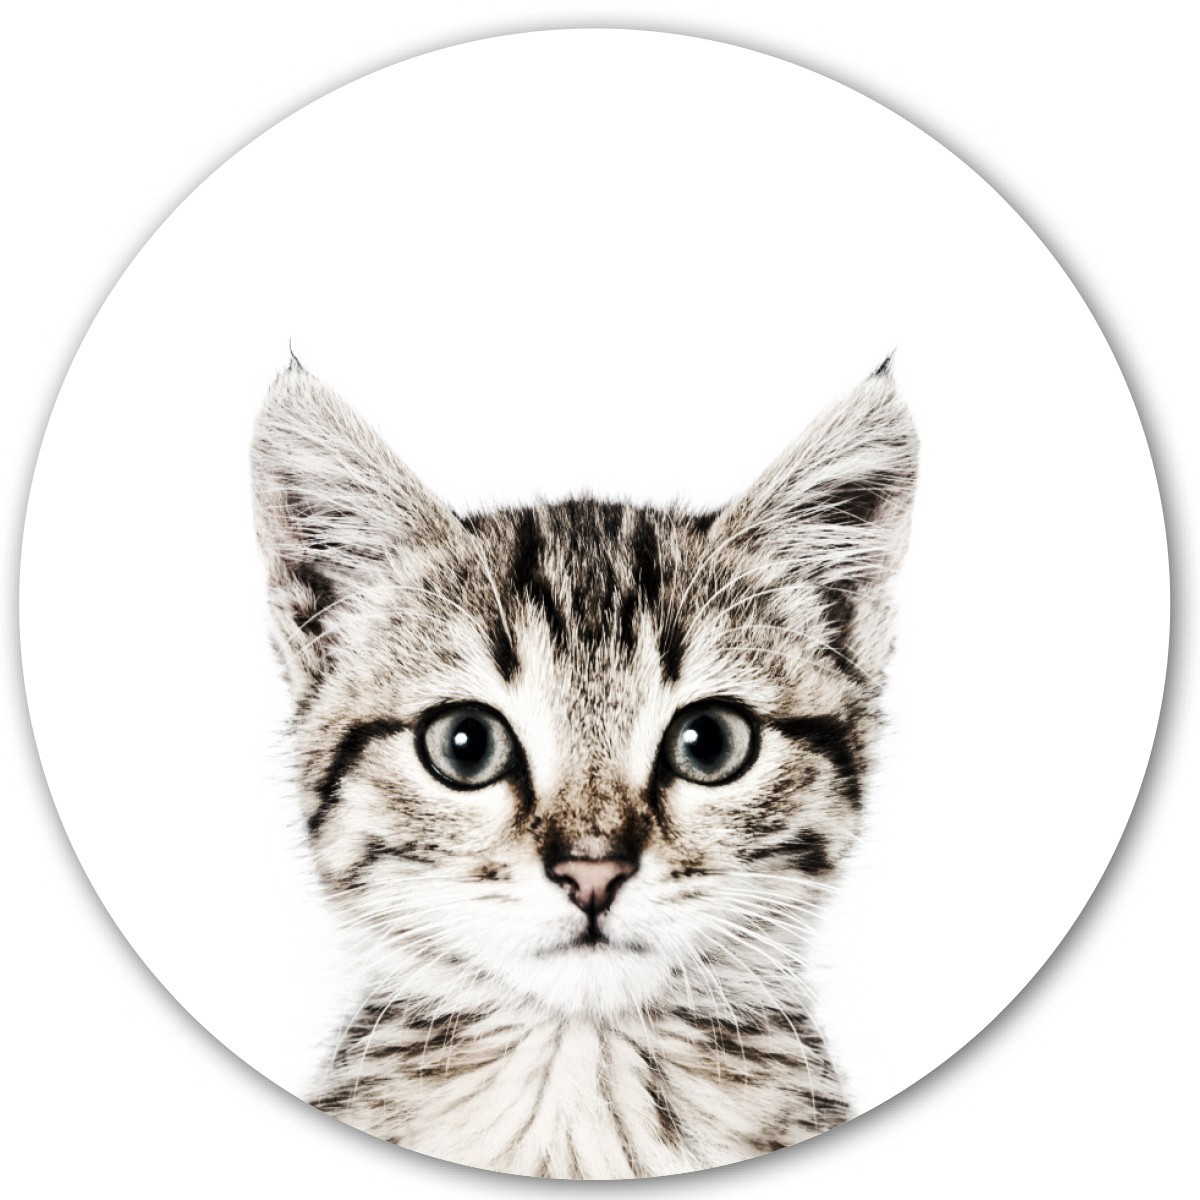 Magnetic wall sticker cat by Groovy Magnets - round adhesive wall sticker with animal print